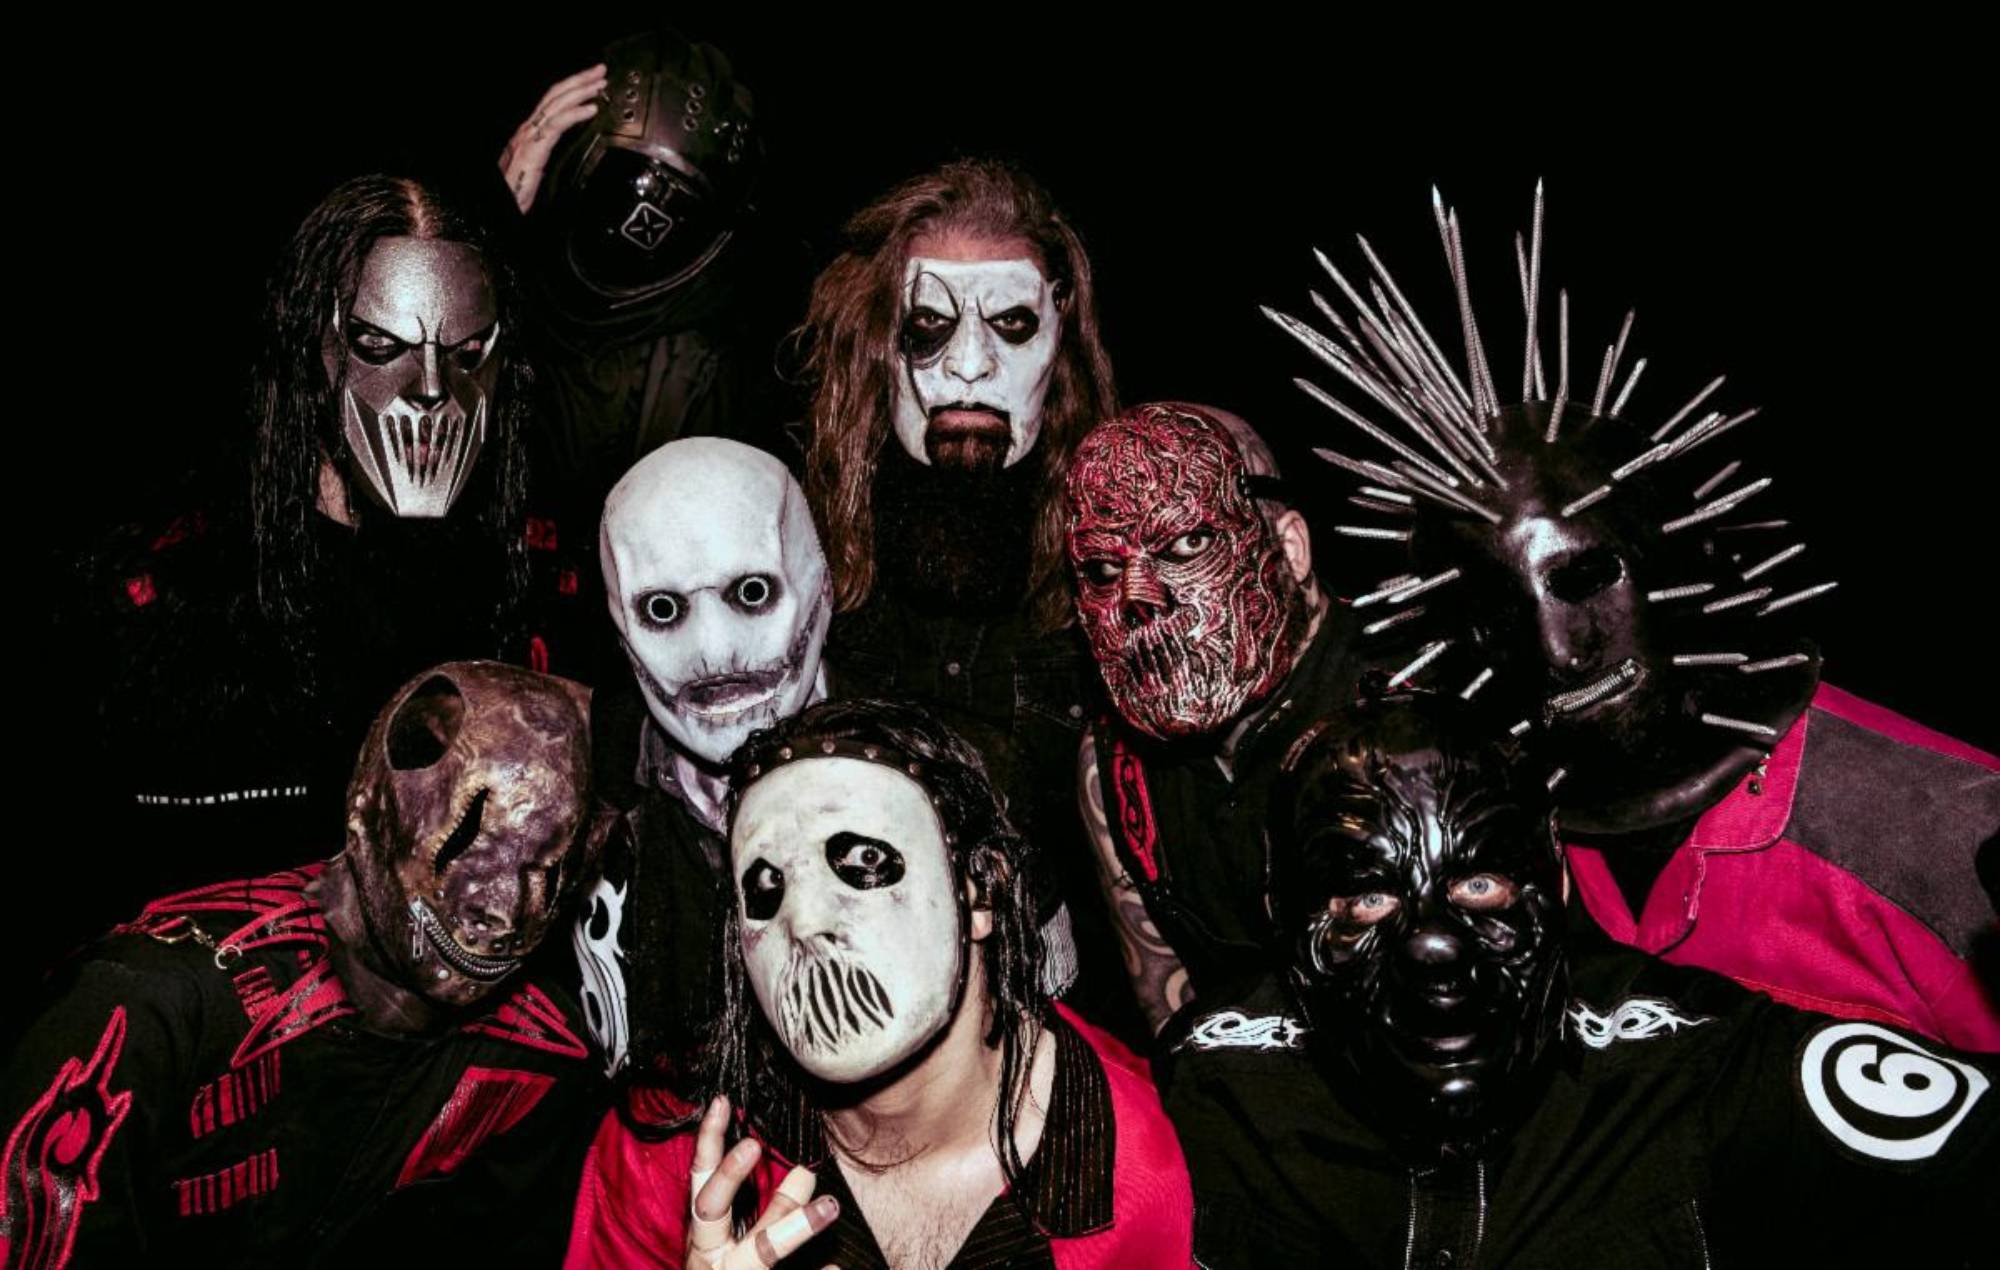 "Did you know that slipknot wear masks because they're wanted criminals". Now imagine me wasting 15 minutes of my life trying to explain that if they were wanted criminals, they'd just arrest them on stage. u/Ramiren